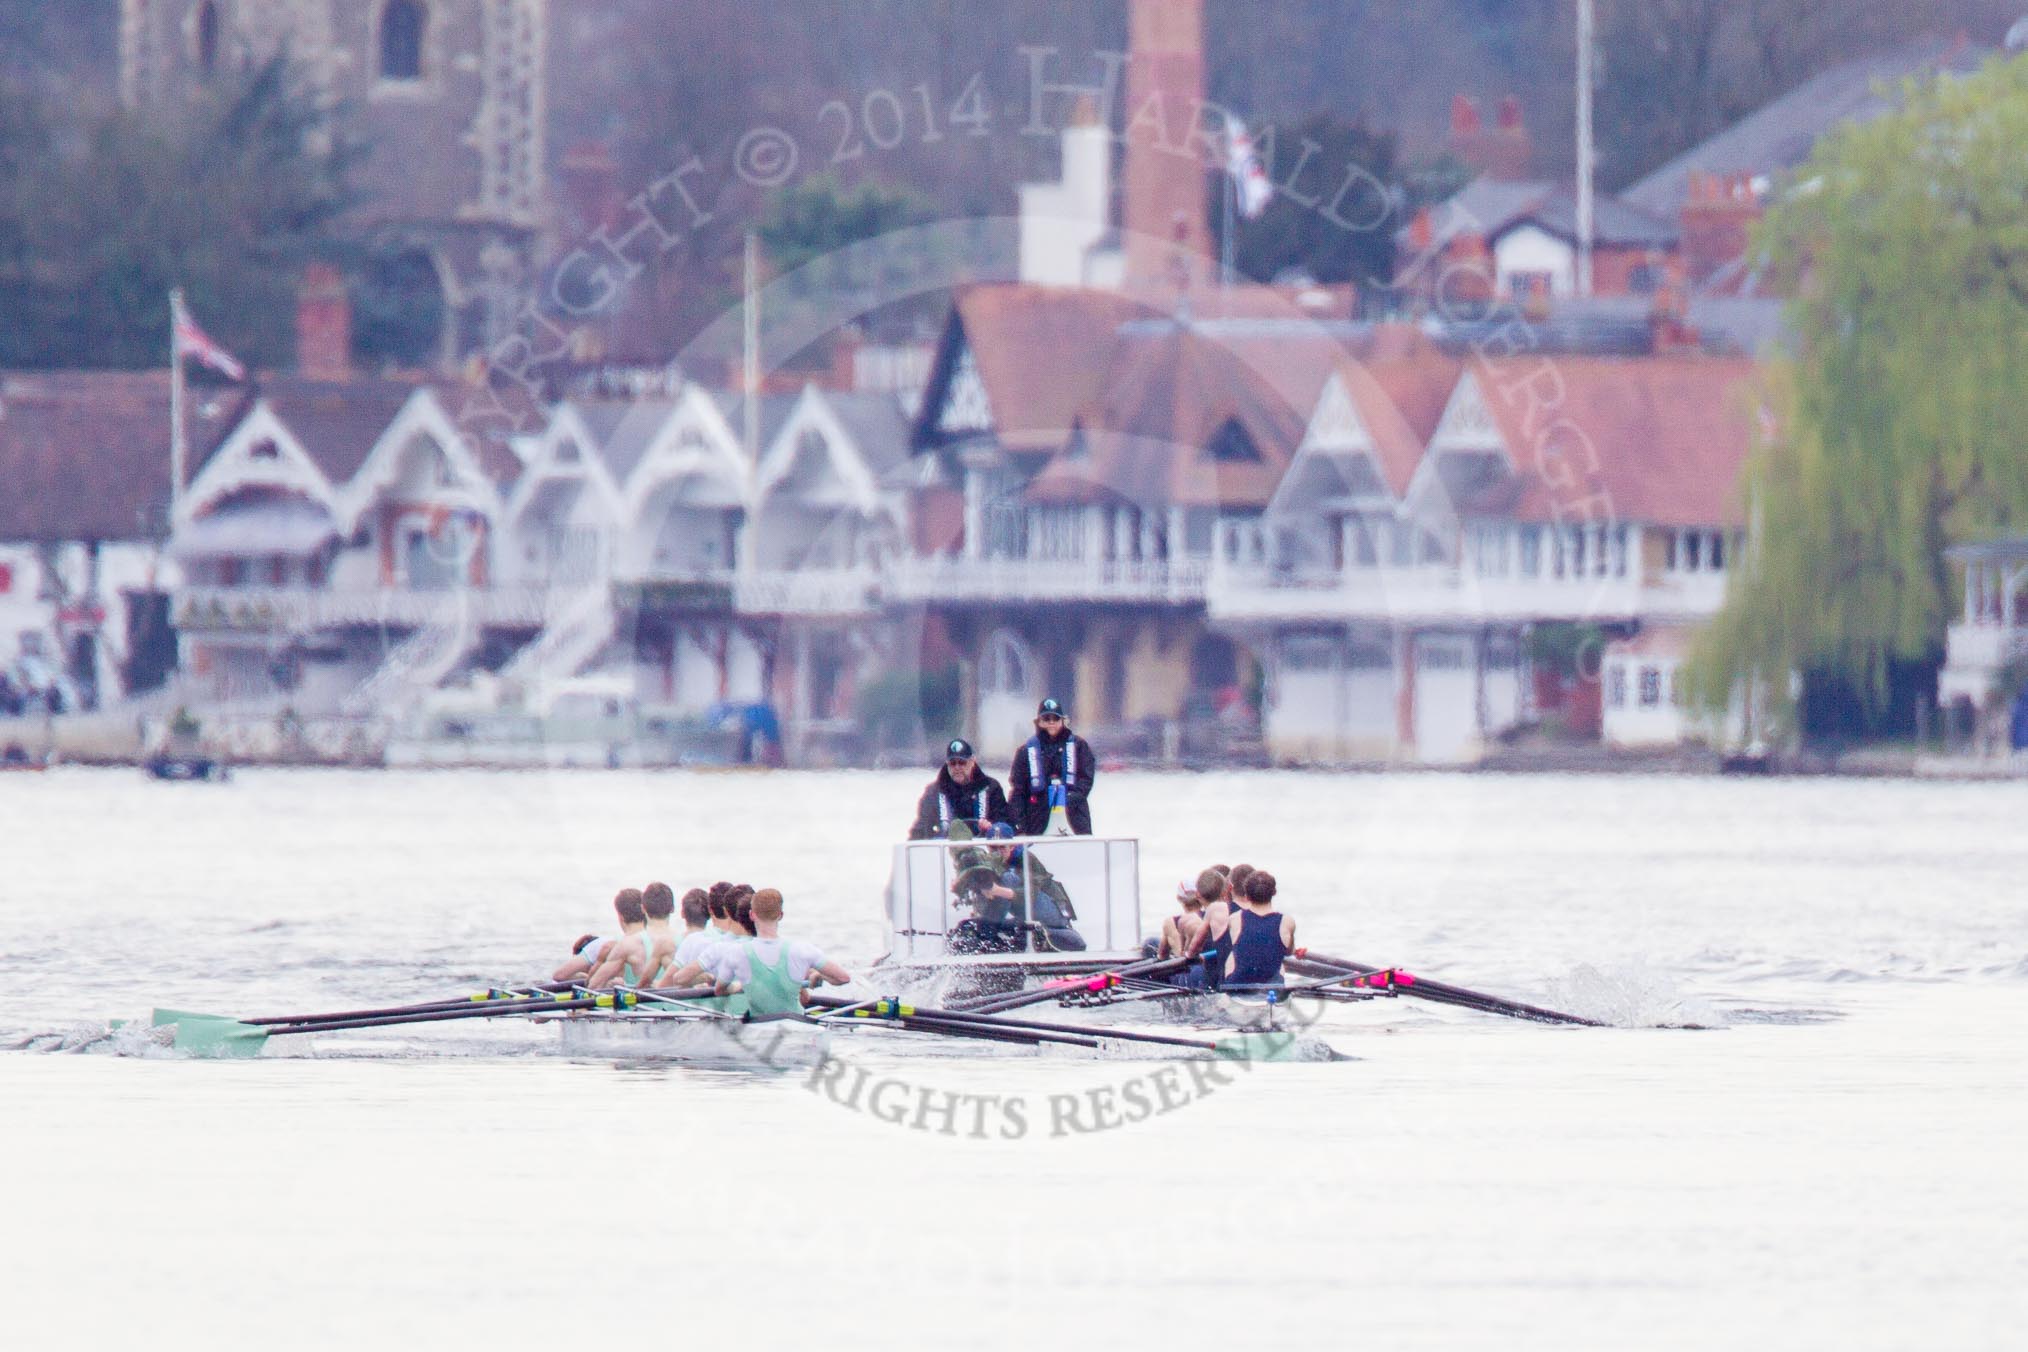 The Women's Boat Race and Henley Boat Races 2014: The Lightweight Men's Boat Race - OULRC vs CULRC, Oxford is on the right (Bucks) side, behind the boats is the umpire's launch..
River Thames,
Henley-on-Thames,
Buckinghamshire,
United Kingdom,
on 30 March 2014 at 15:39, image #357